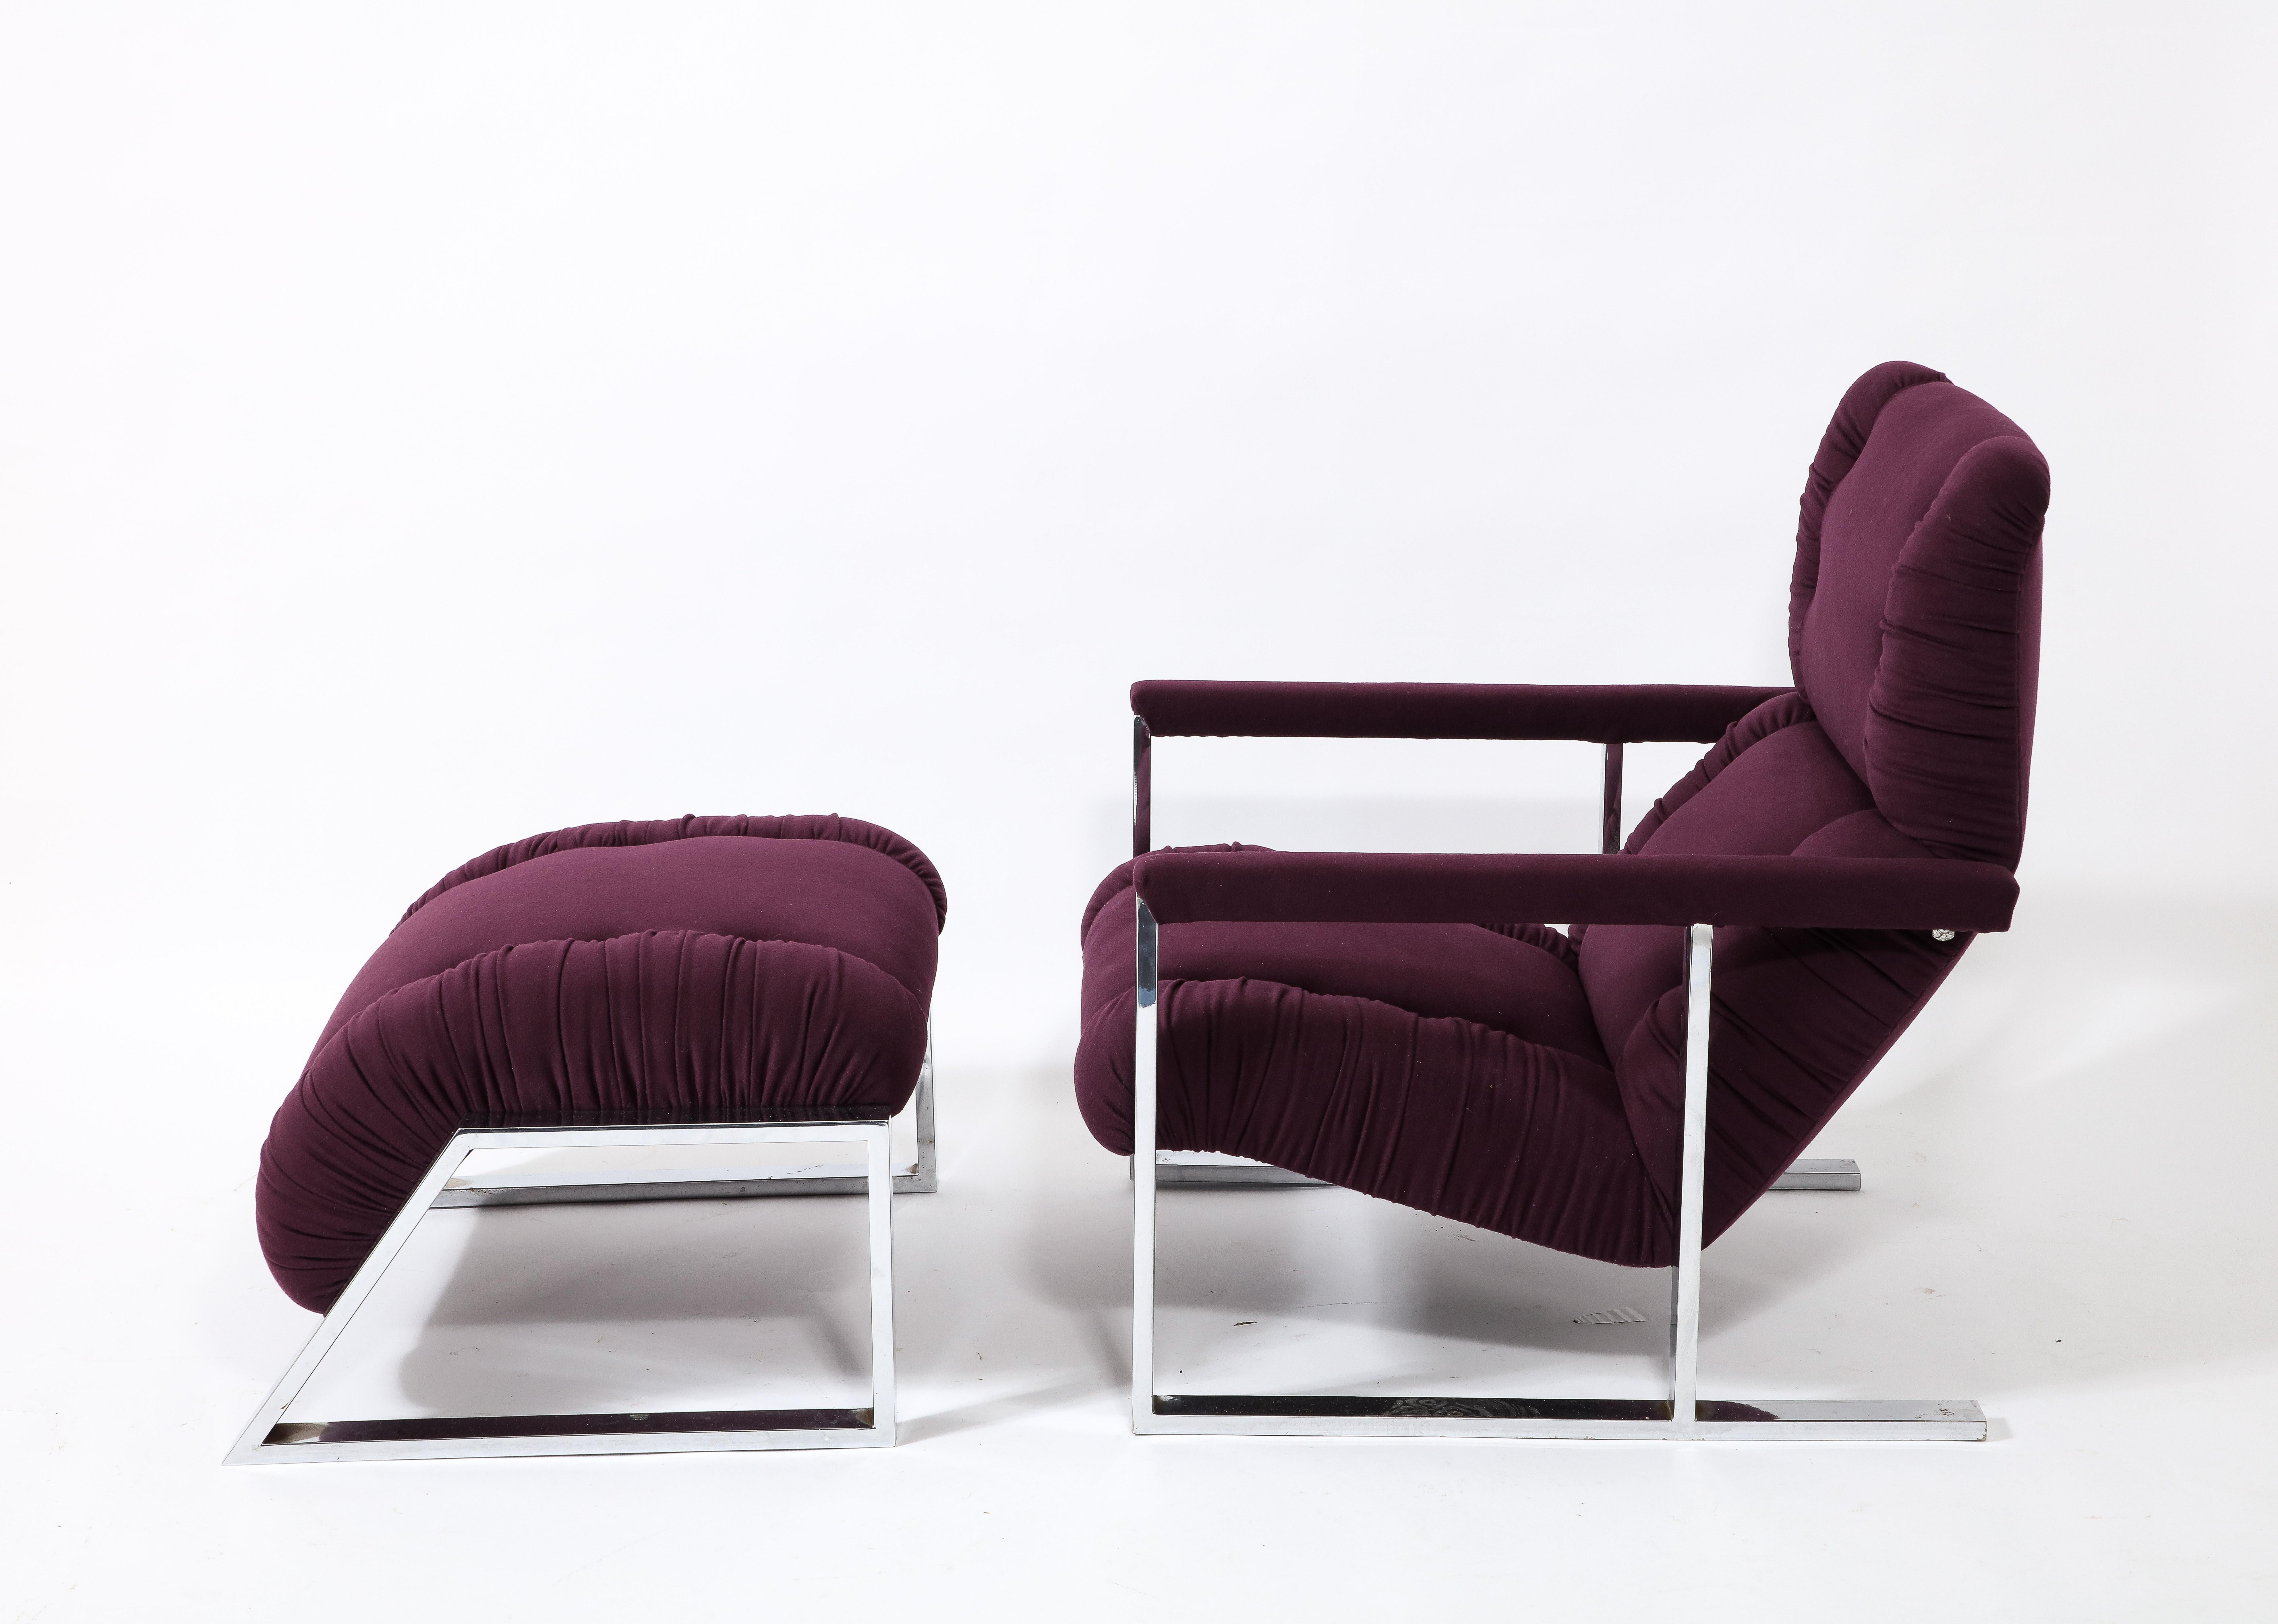 Late 20th Century Modernist Angular Chrome Lounge Chair & Ottoman in Aubergine Wool, USA 1970's For Sale